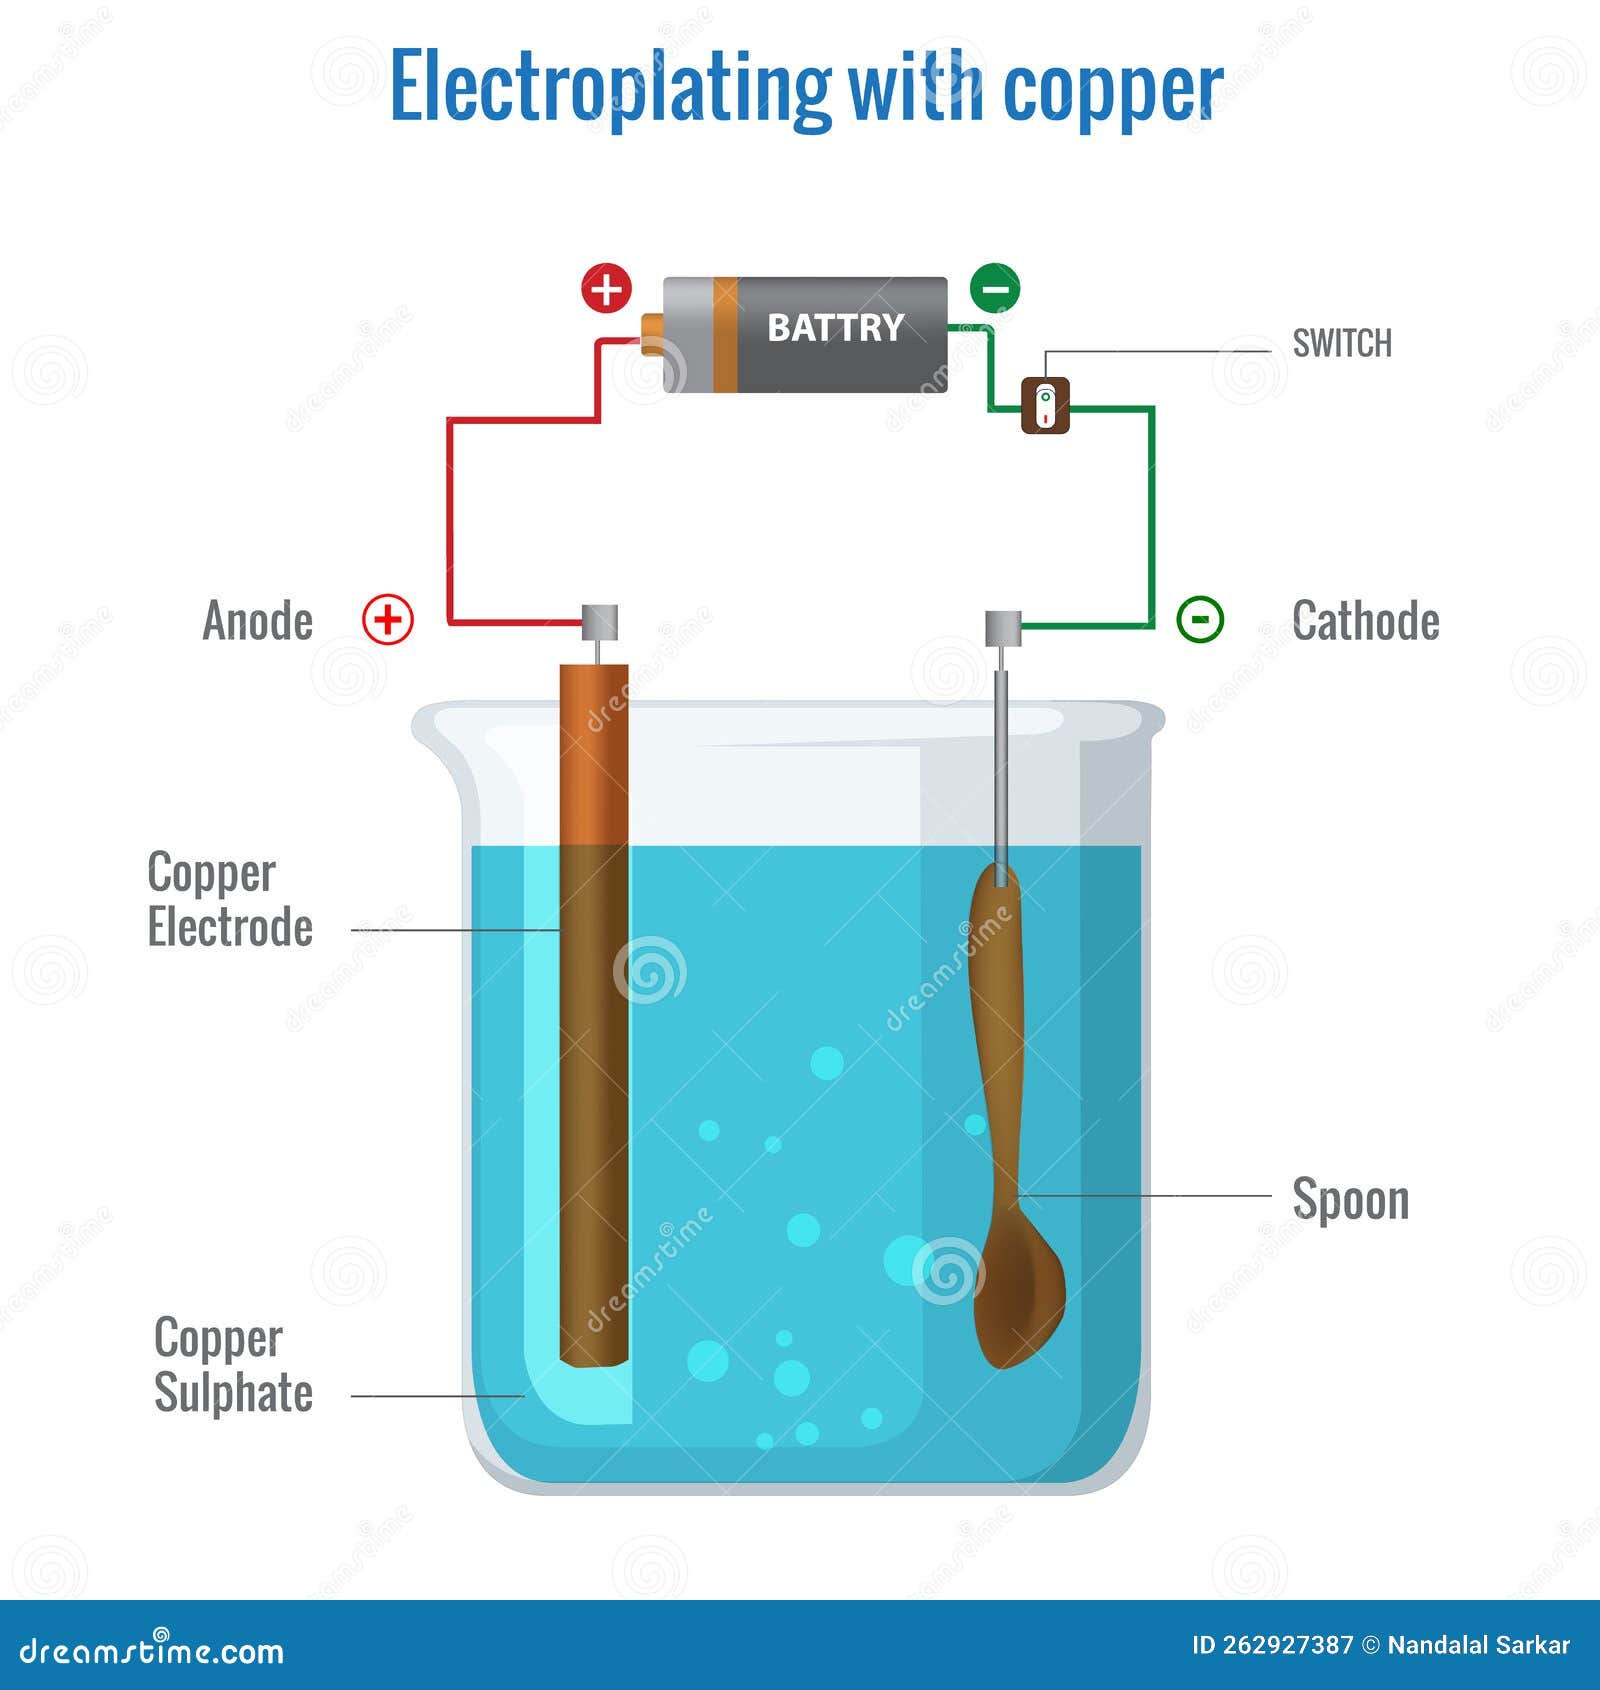 Copper sulphate Images - Search Images on Everypixel